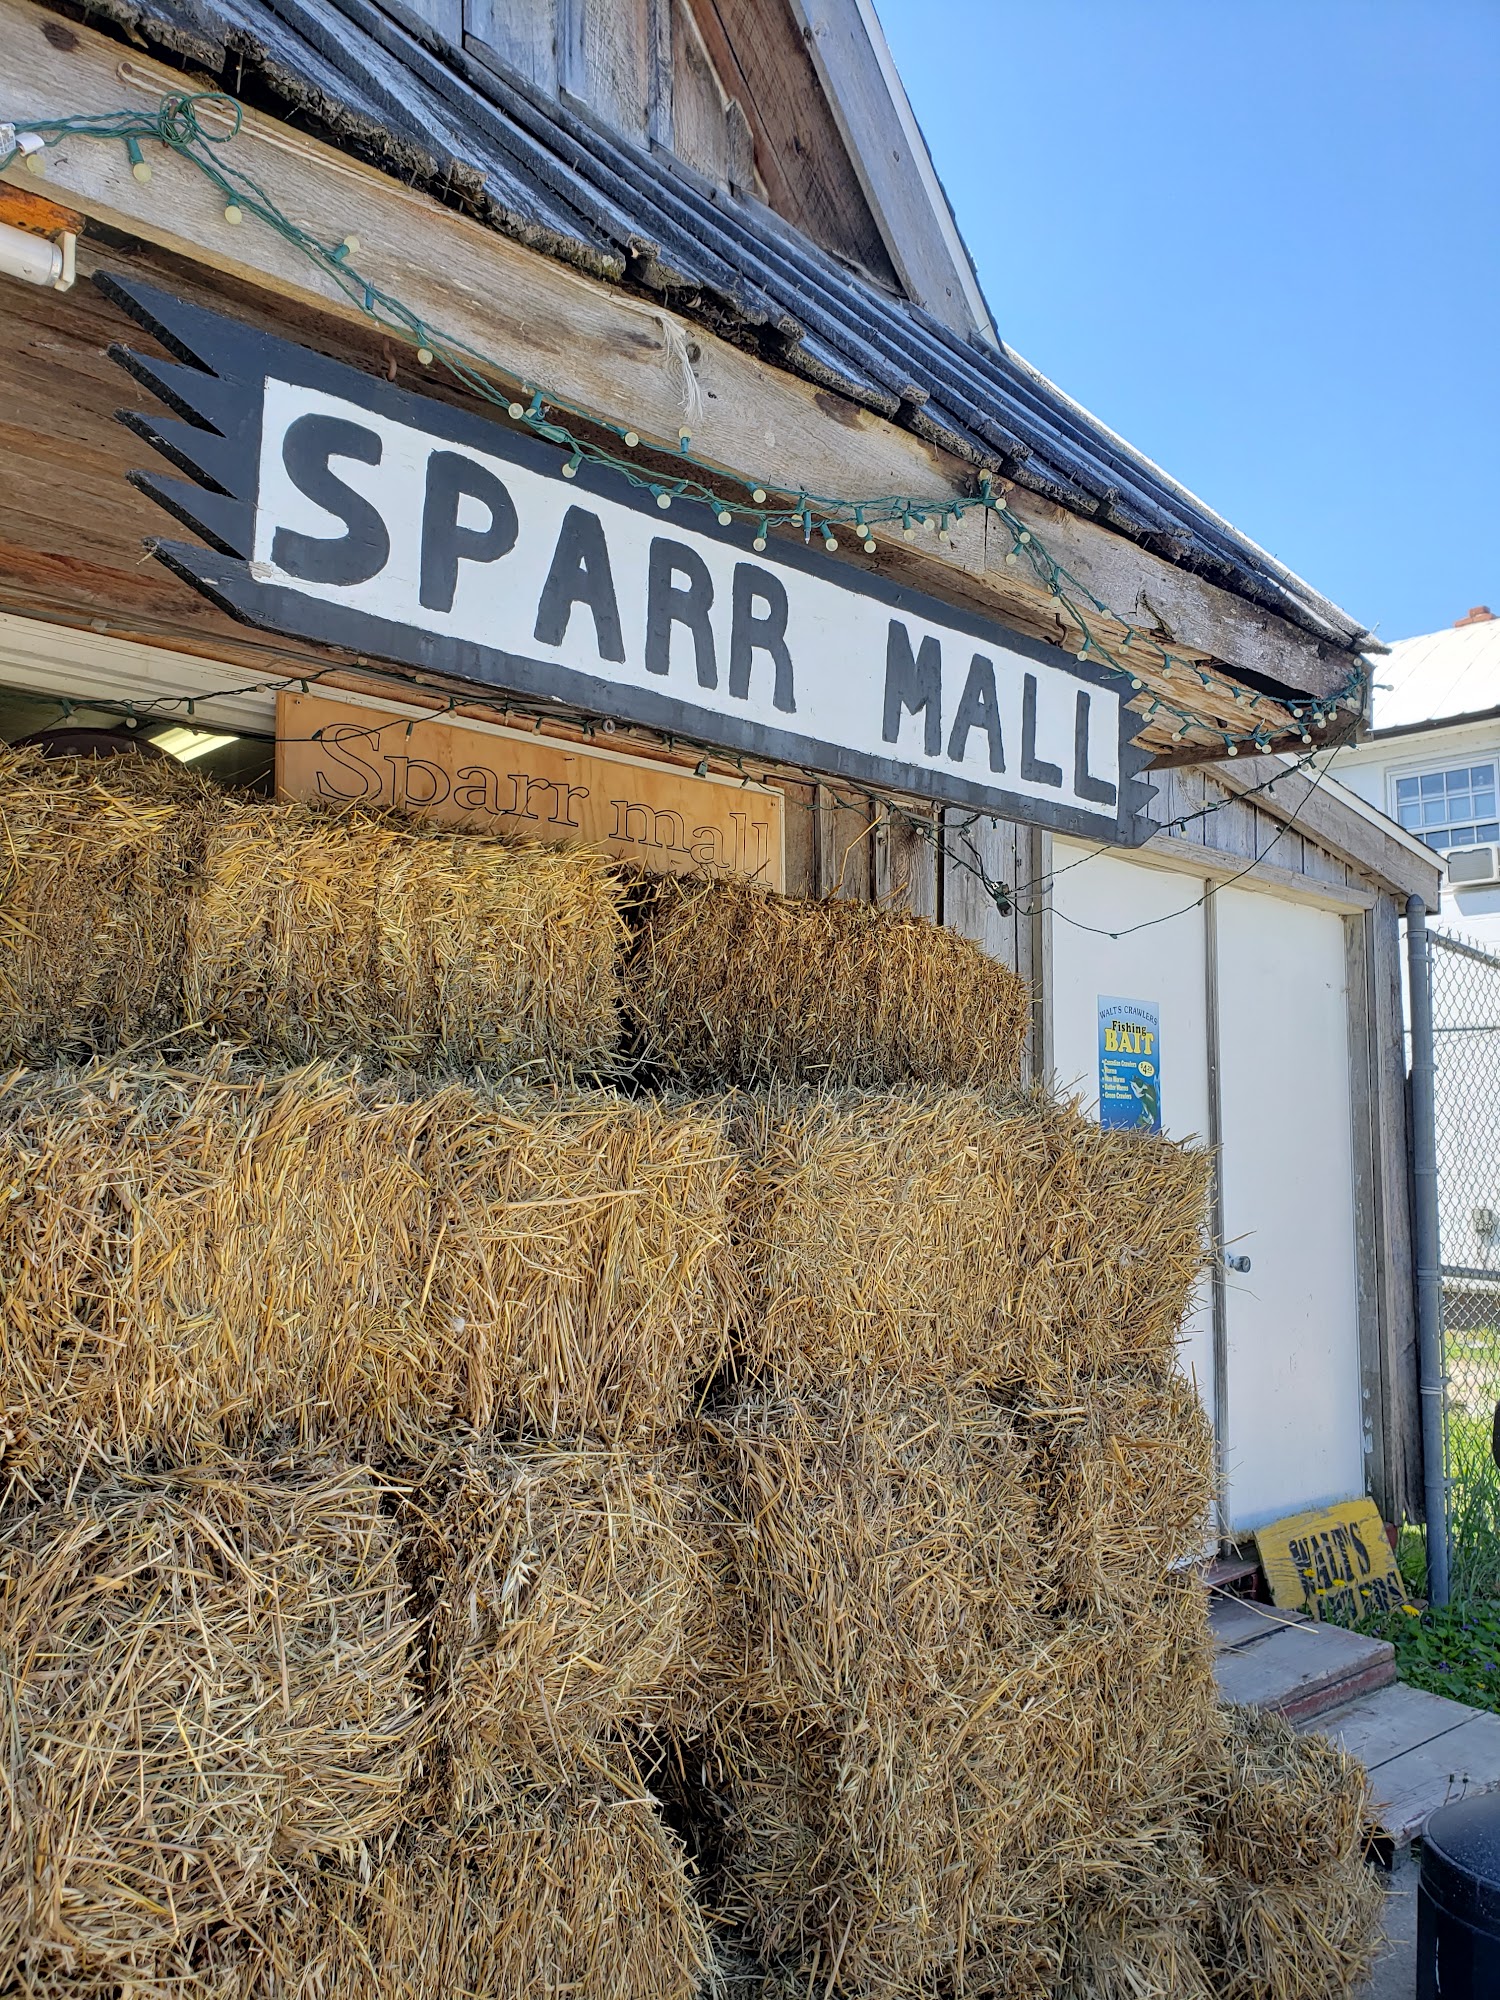 Sparr Mall